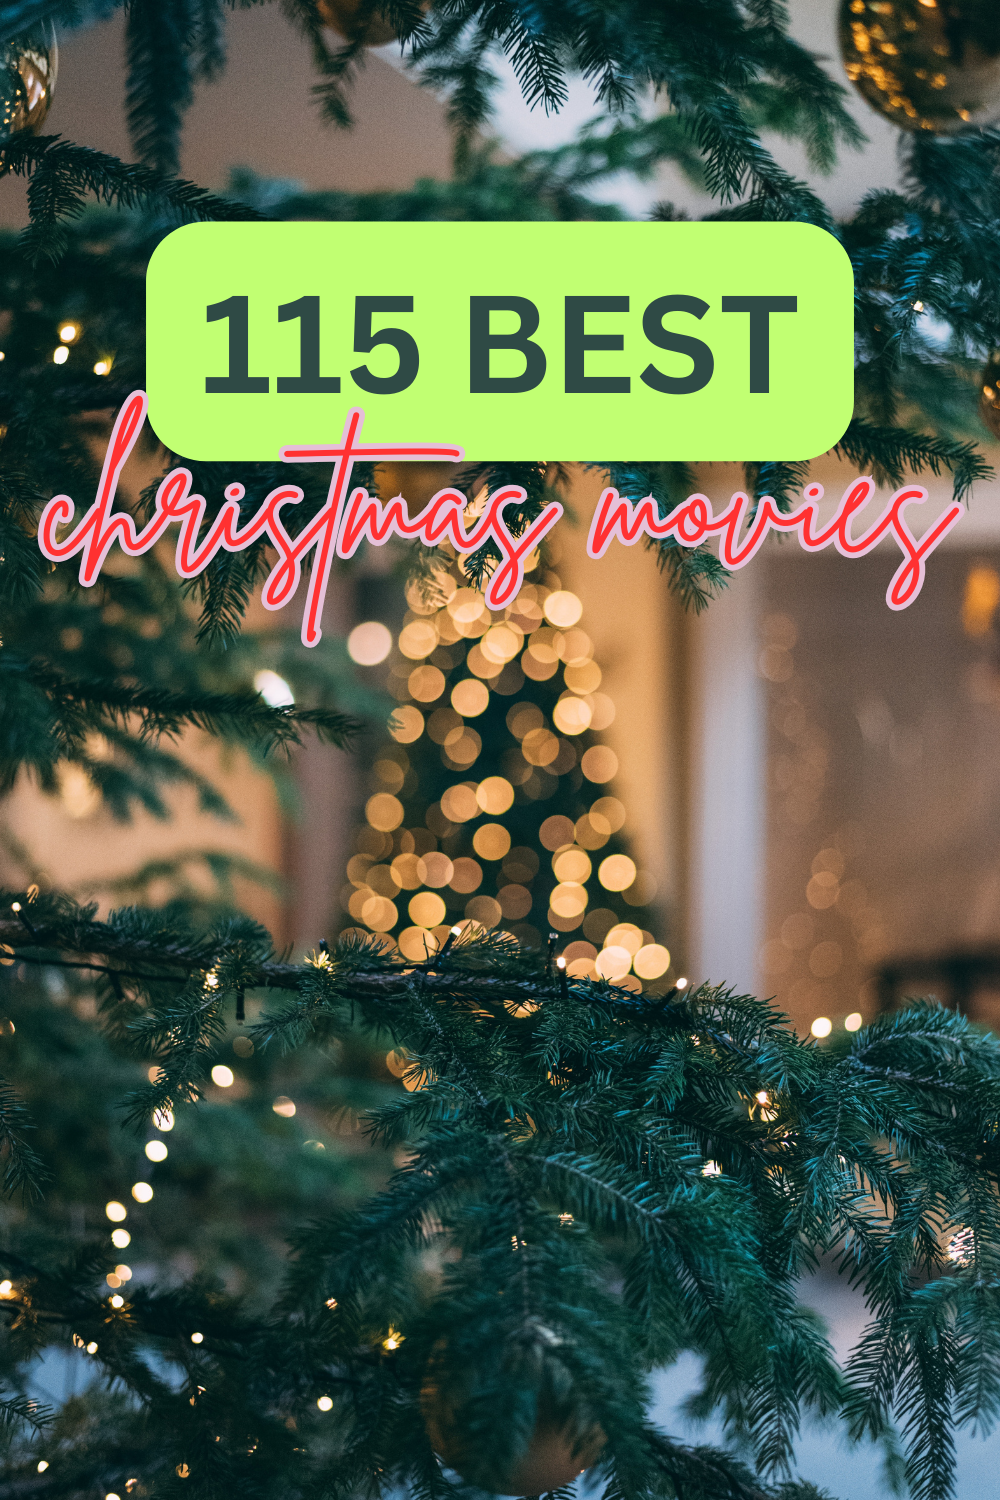 Looking for the best Christmas movies to cuddle up and watch? I've got you covered with 115 Christmas movies for kids and adults to enjoy!